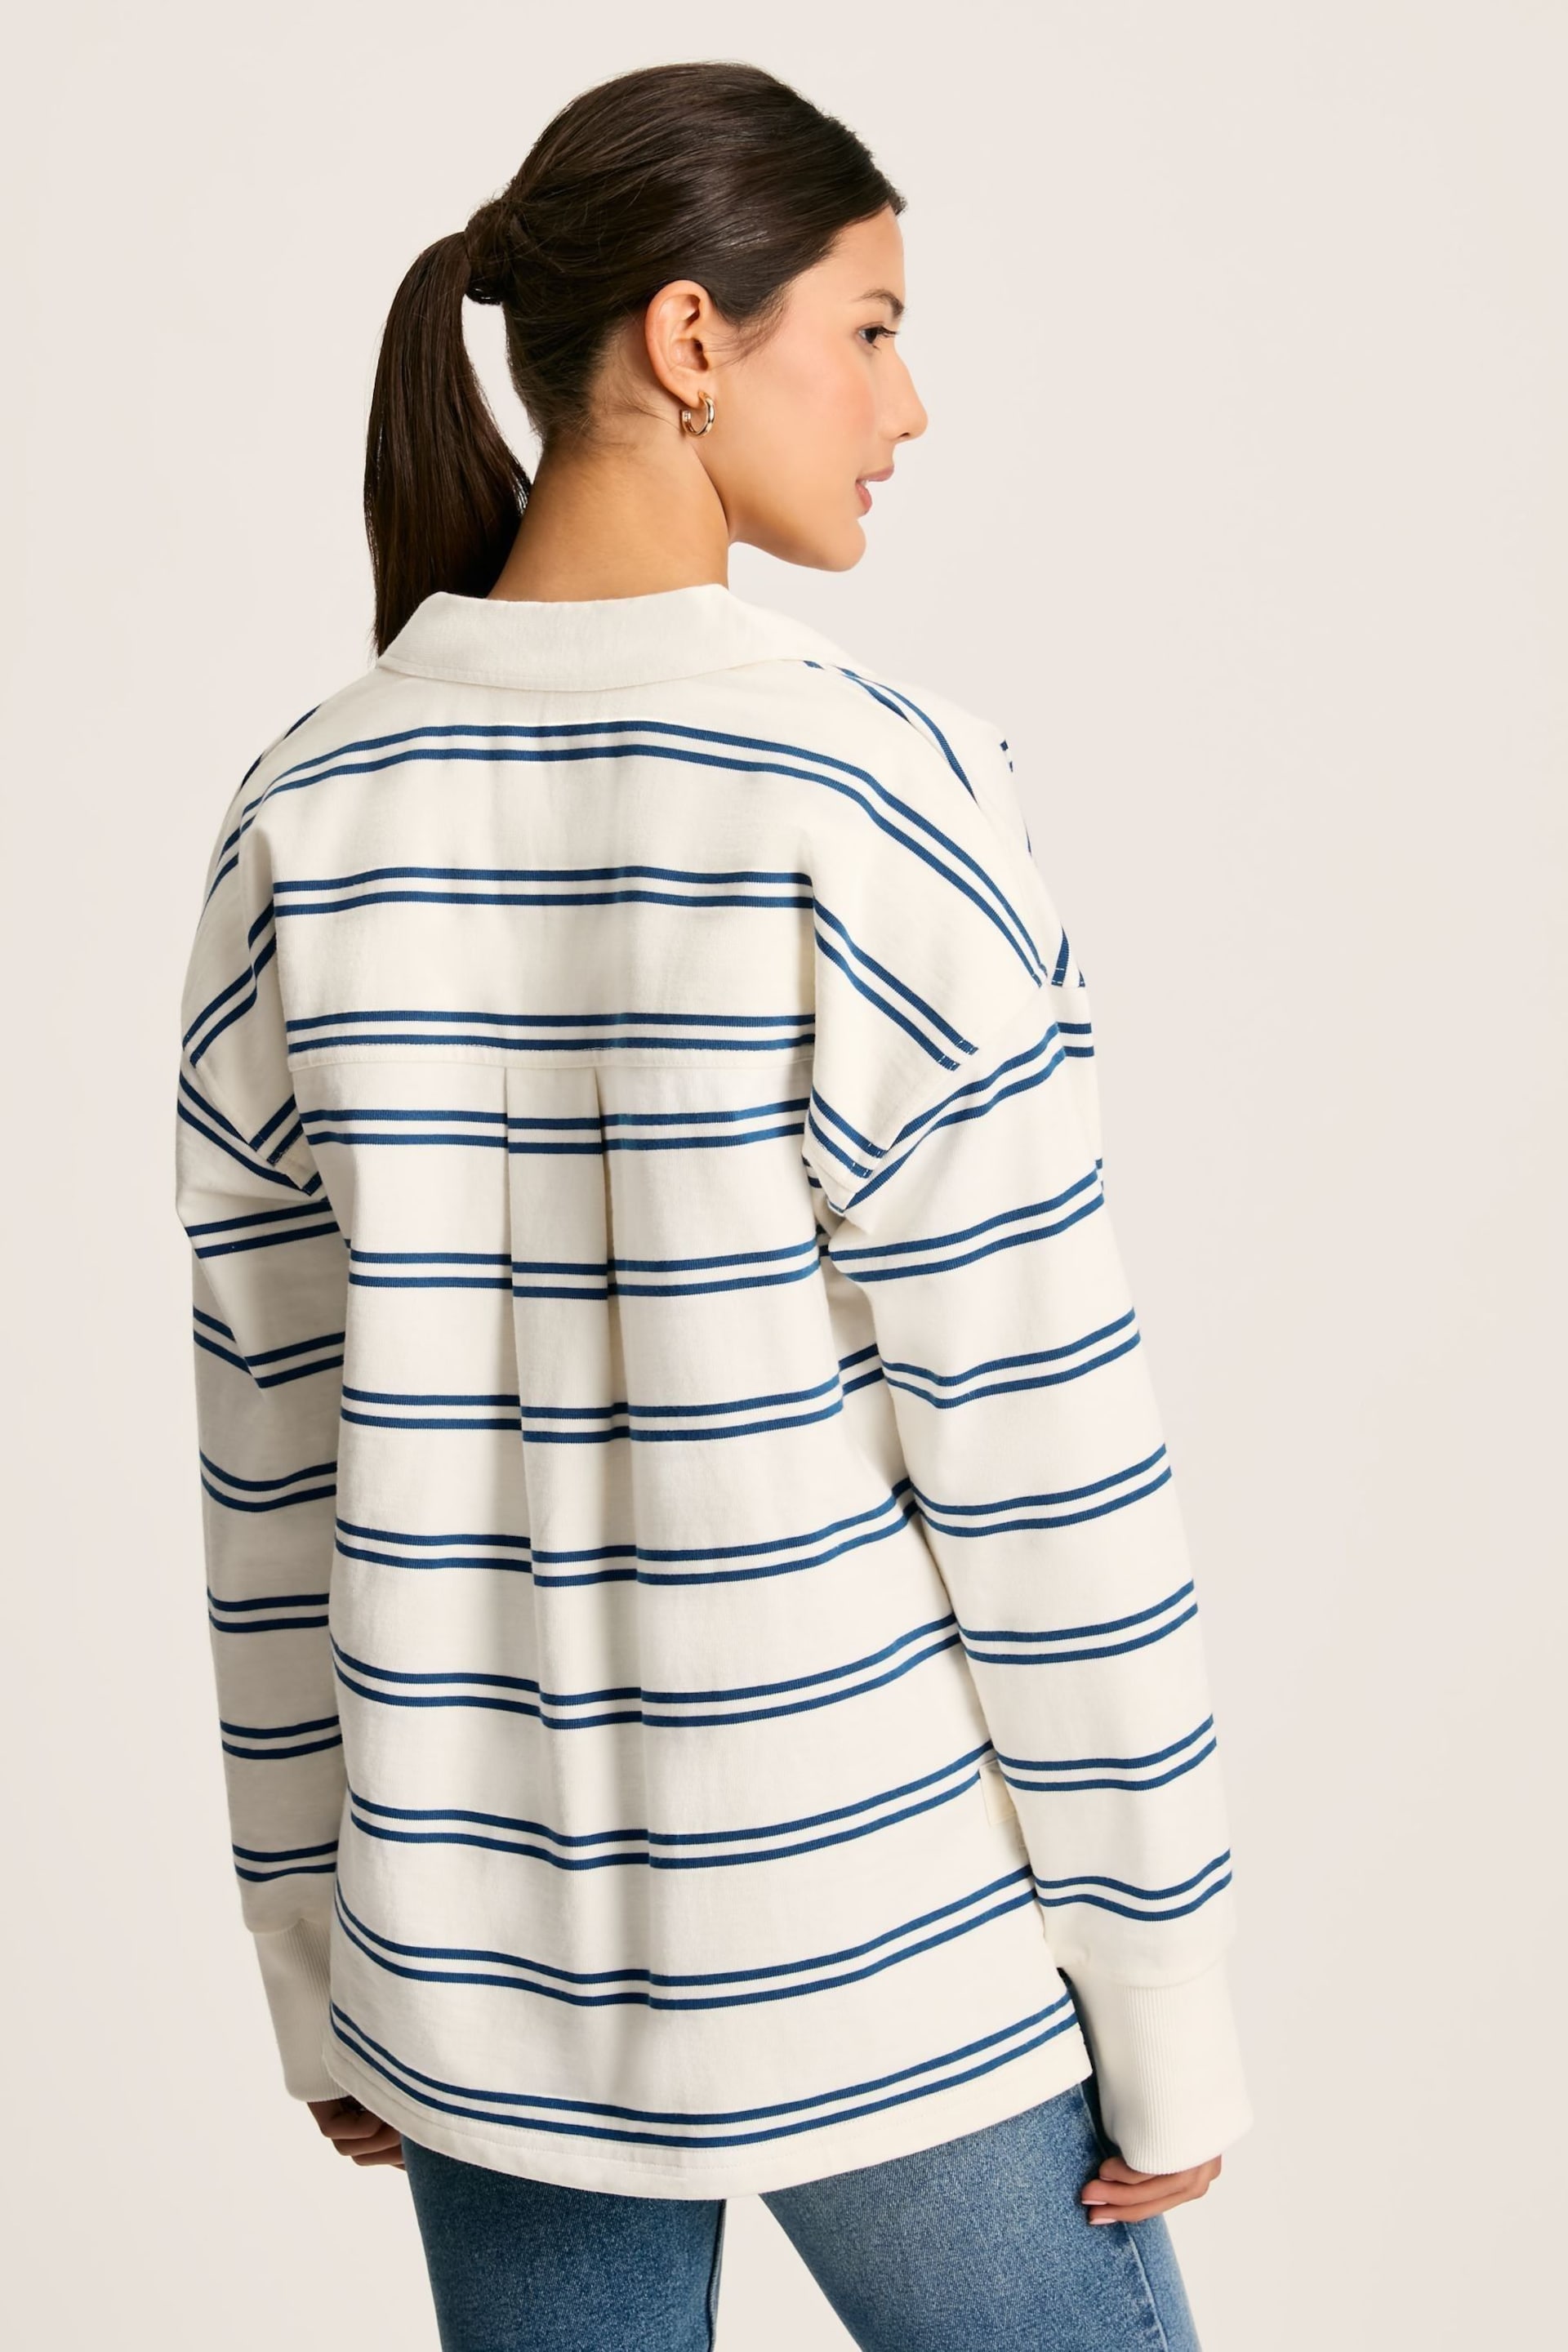 Joules Bayside Cream/Navy Cotton Deck Shirt - Image 2 of 7